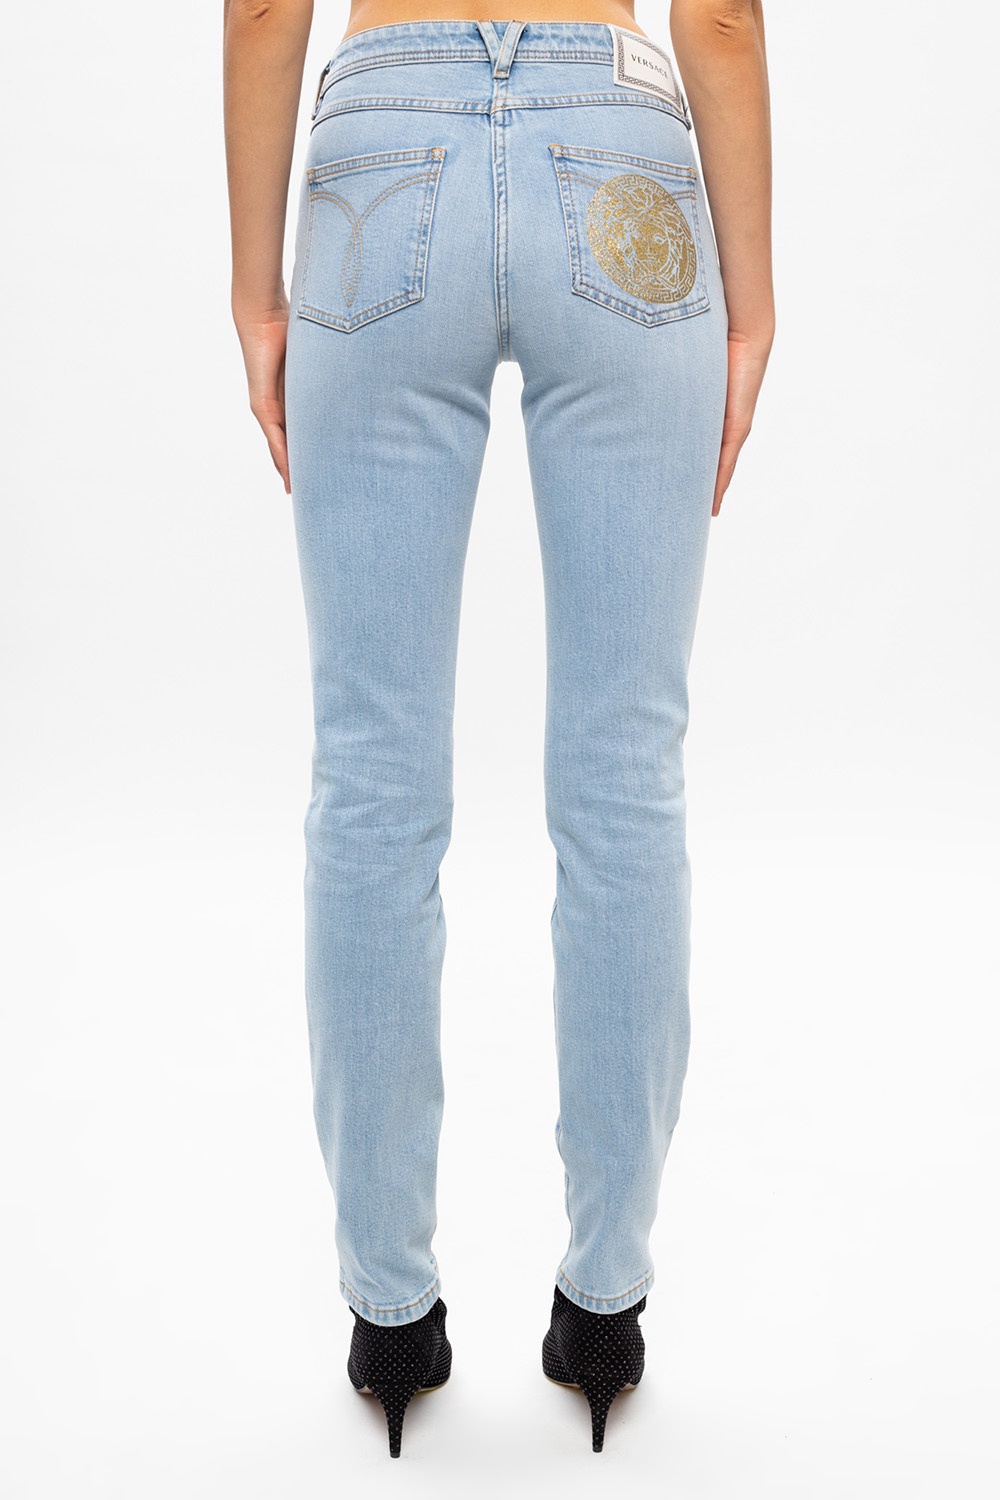 Versace head jeans | clothing 41 Shorts | Women's Clothing